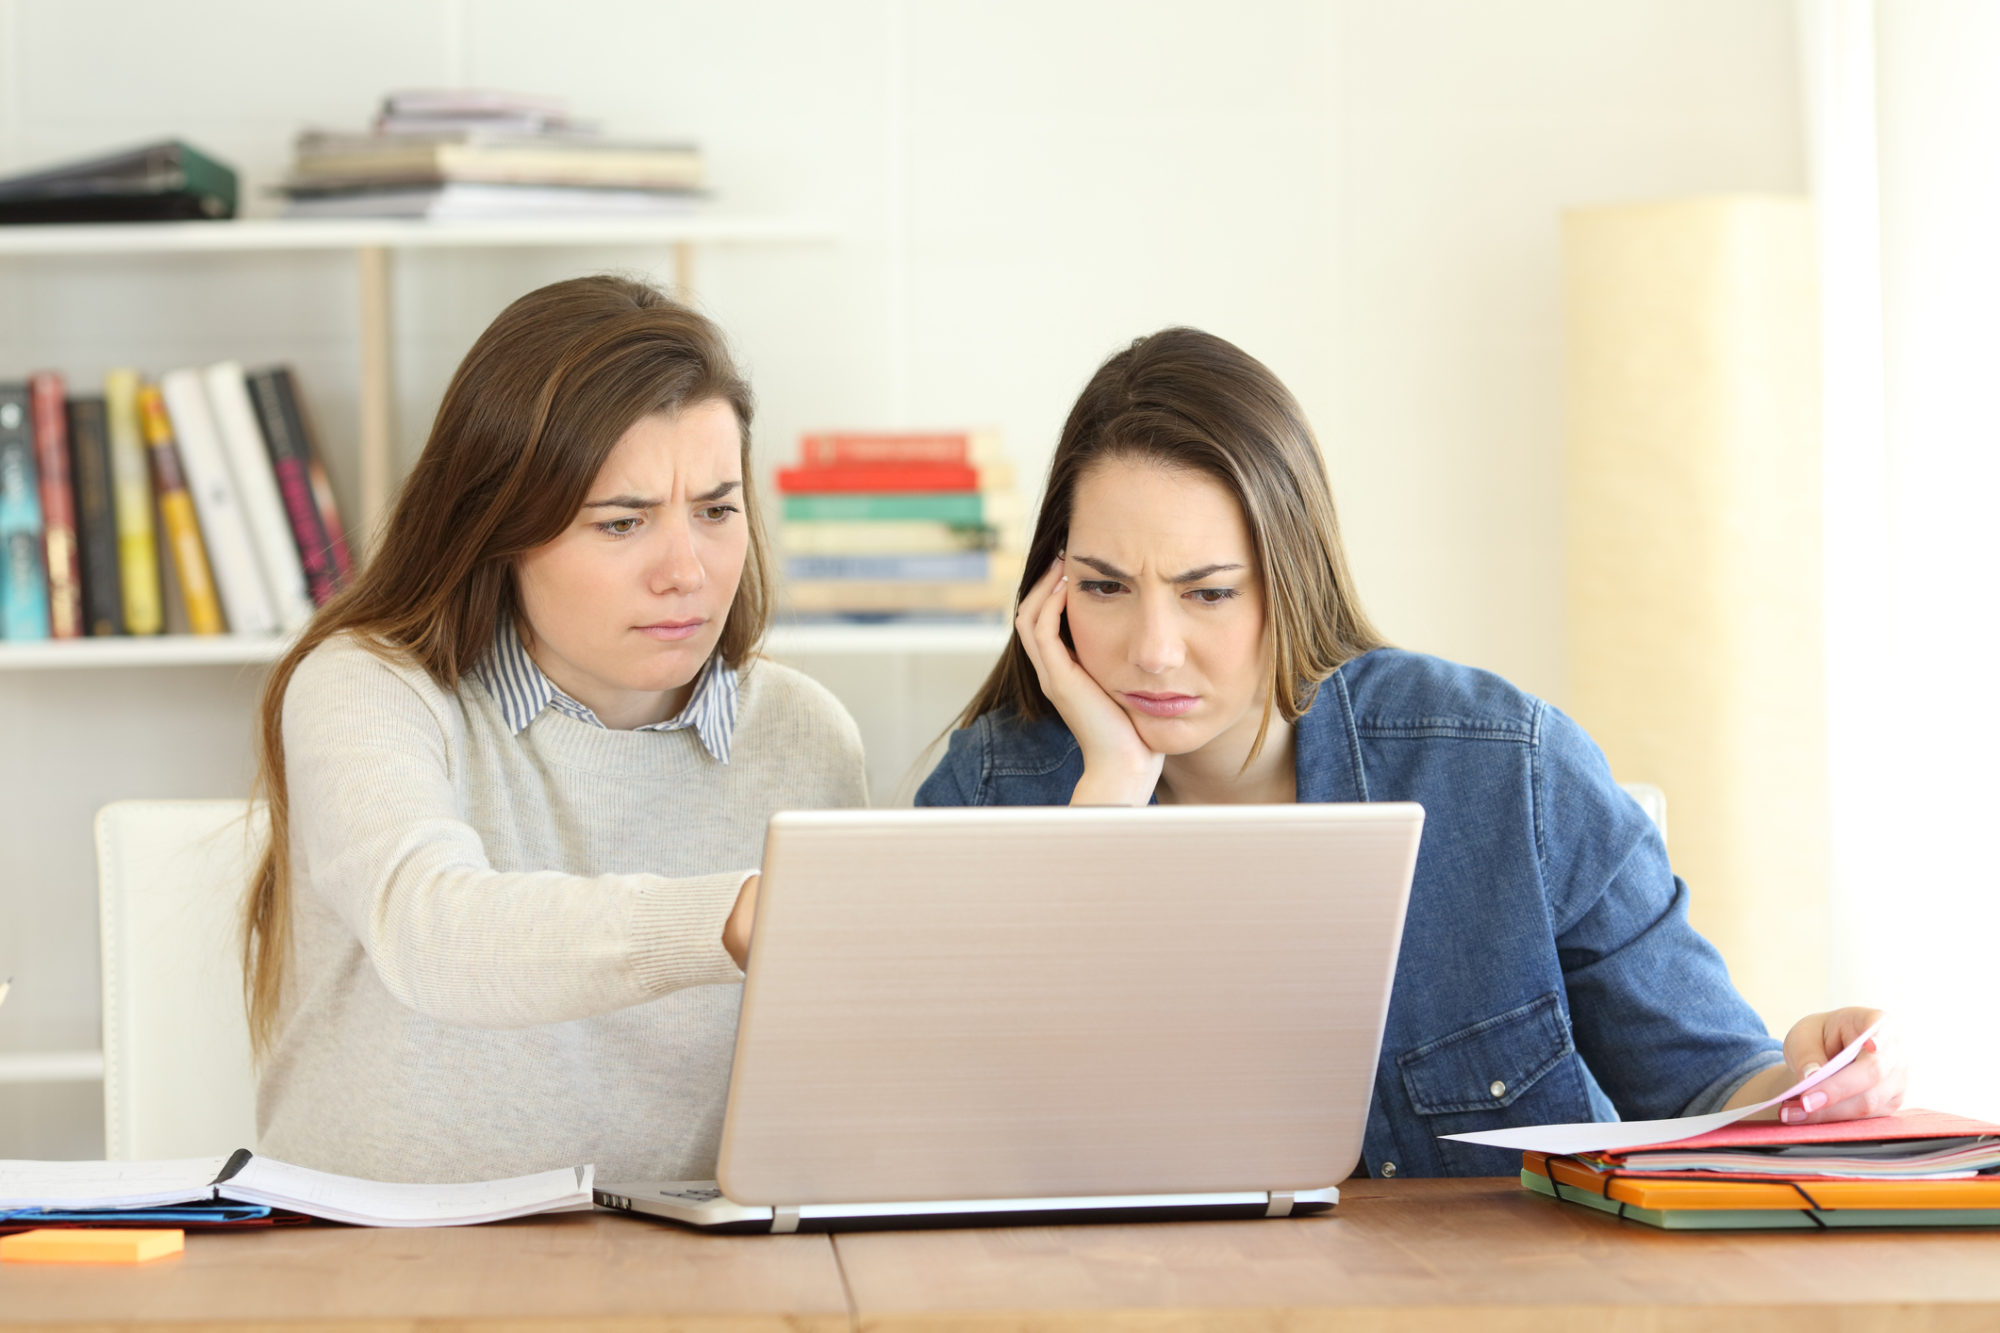 Two women looking at a laptop on a table at home with confused expressions.